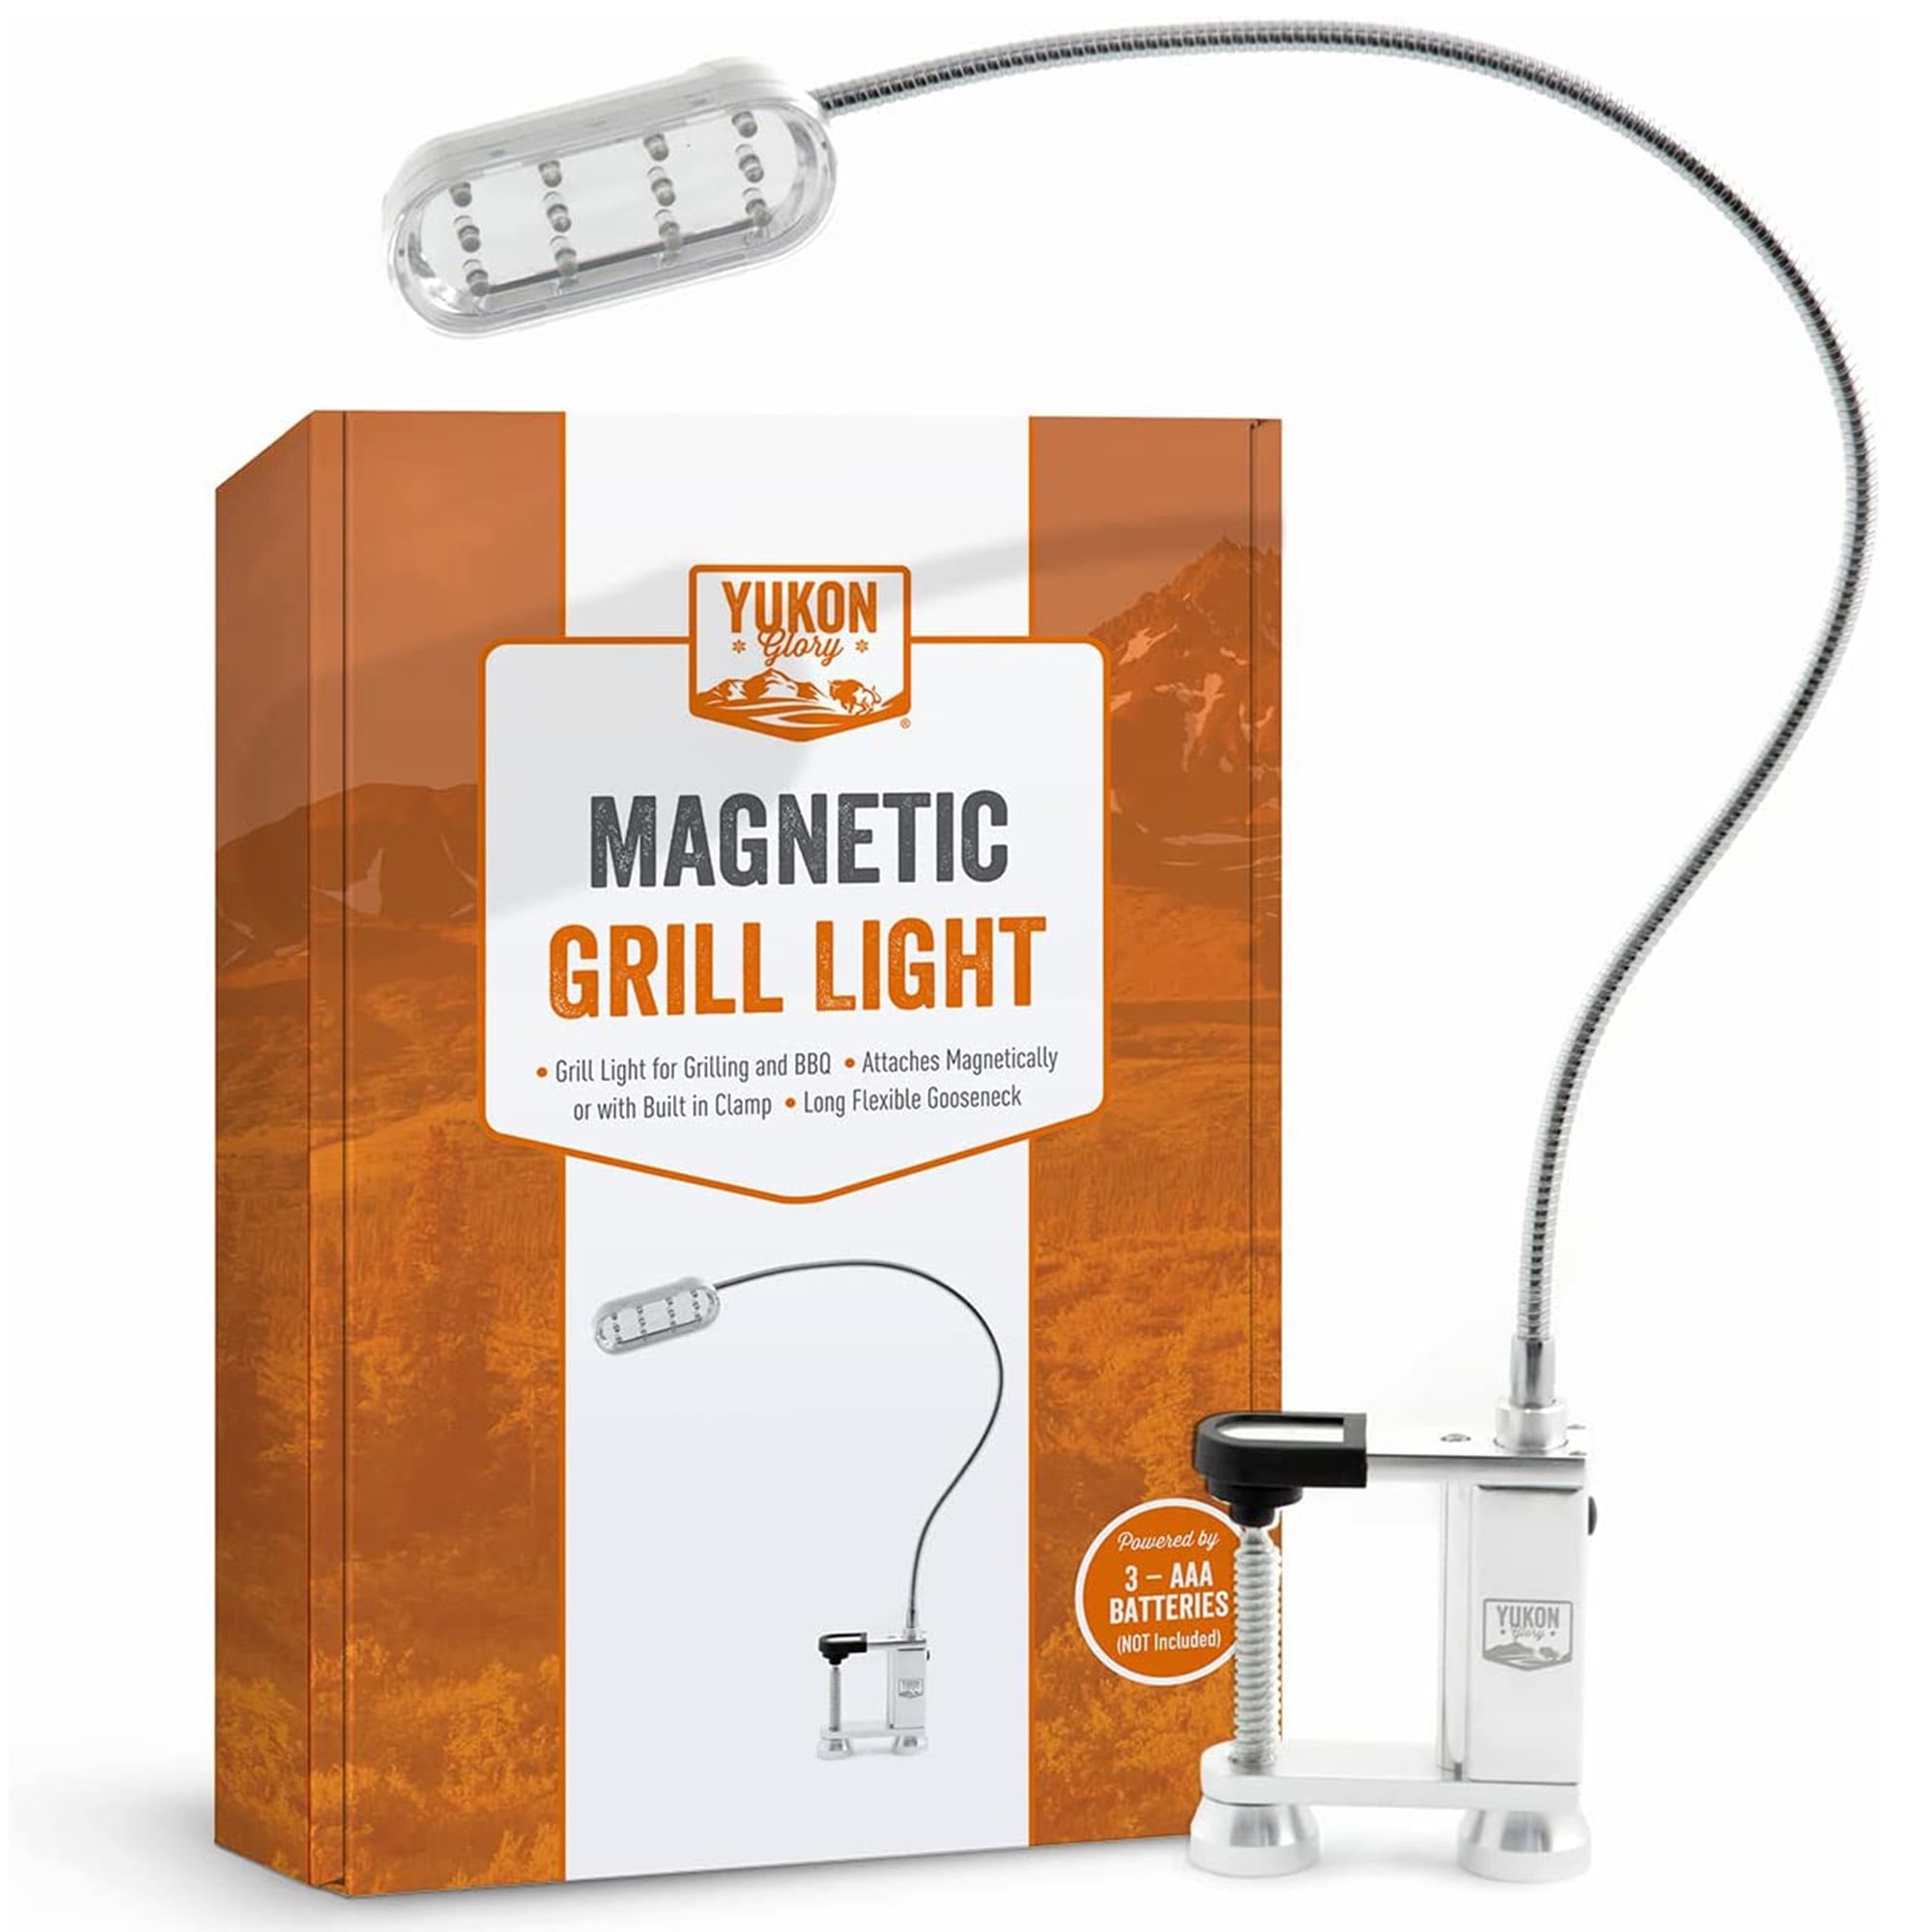 Grillight  Premium Grill Tools with Built-In LED Lights